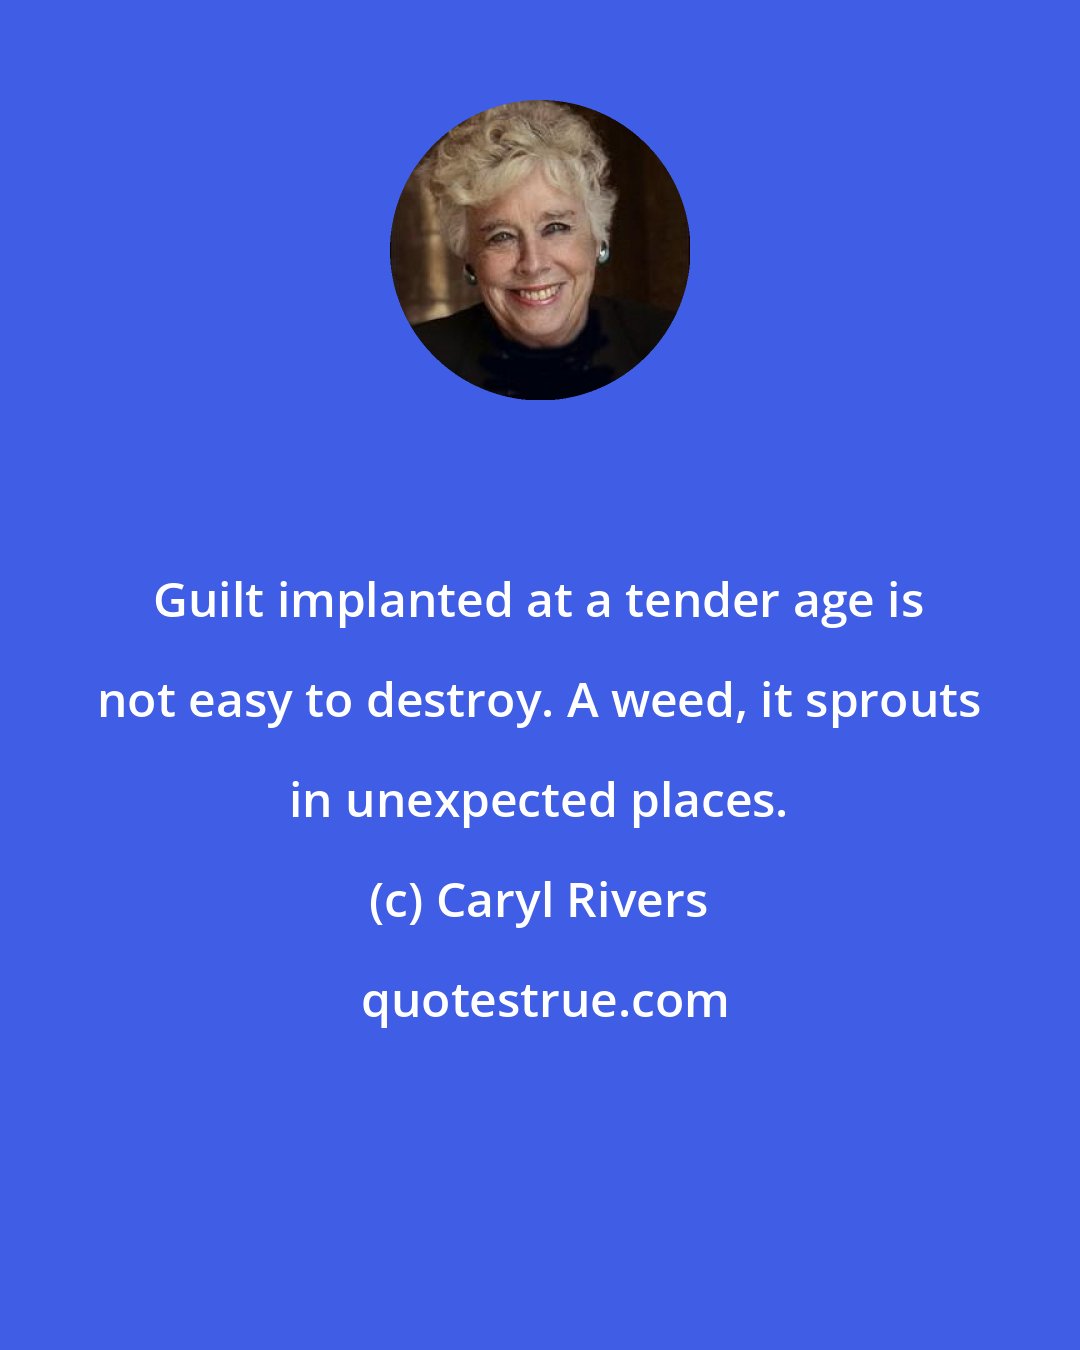 Caryl Rivers: Guilt implanted at a tender age is not easy to destroy. A weed, it sprouts in unexpected places.